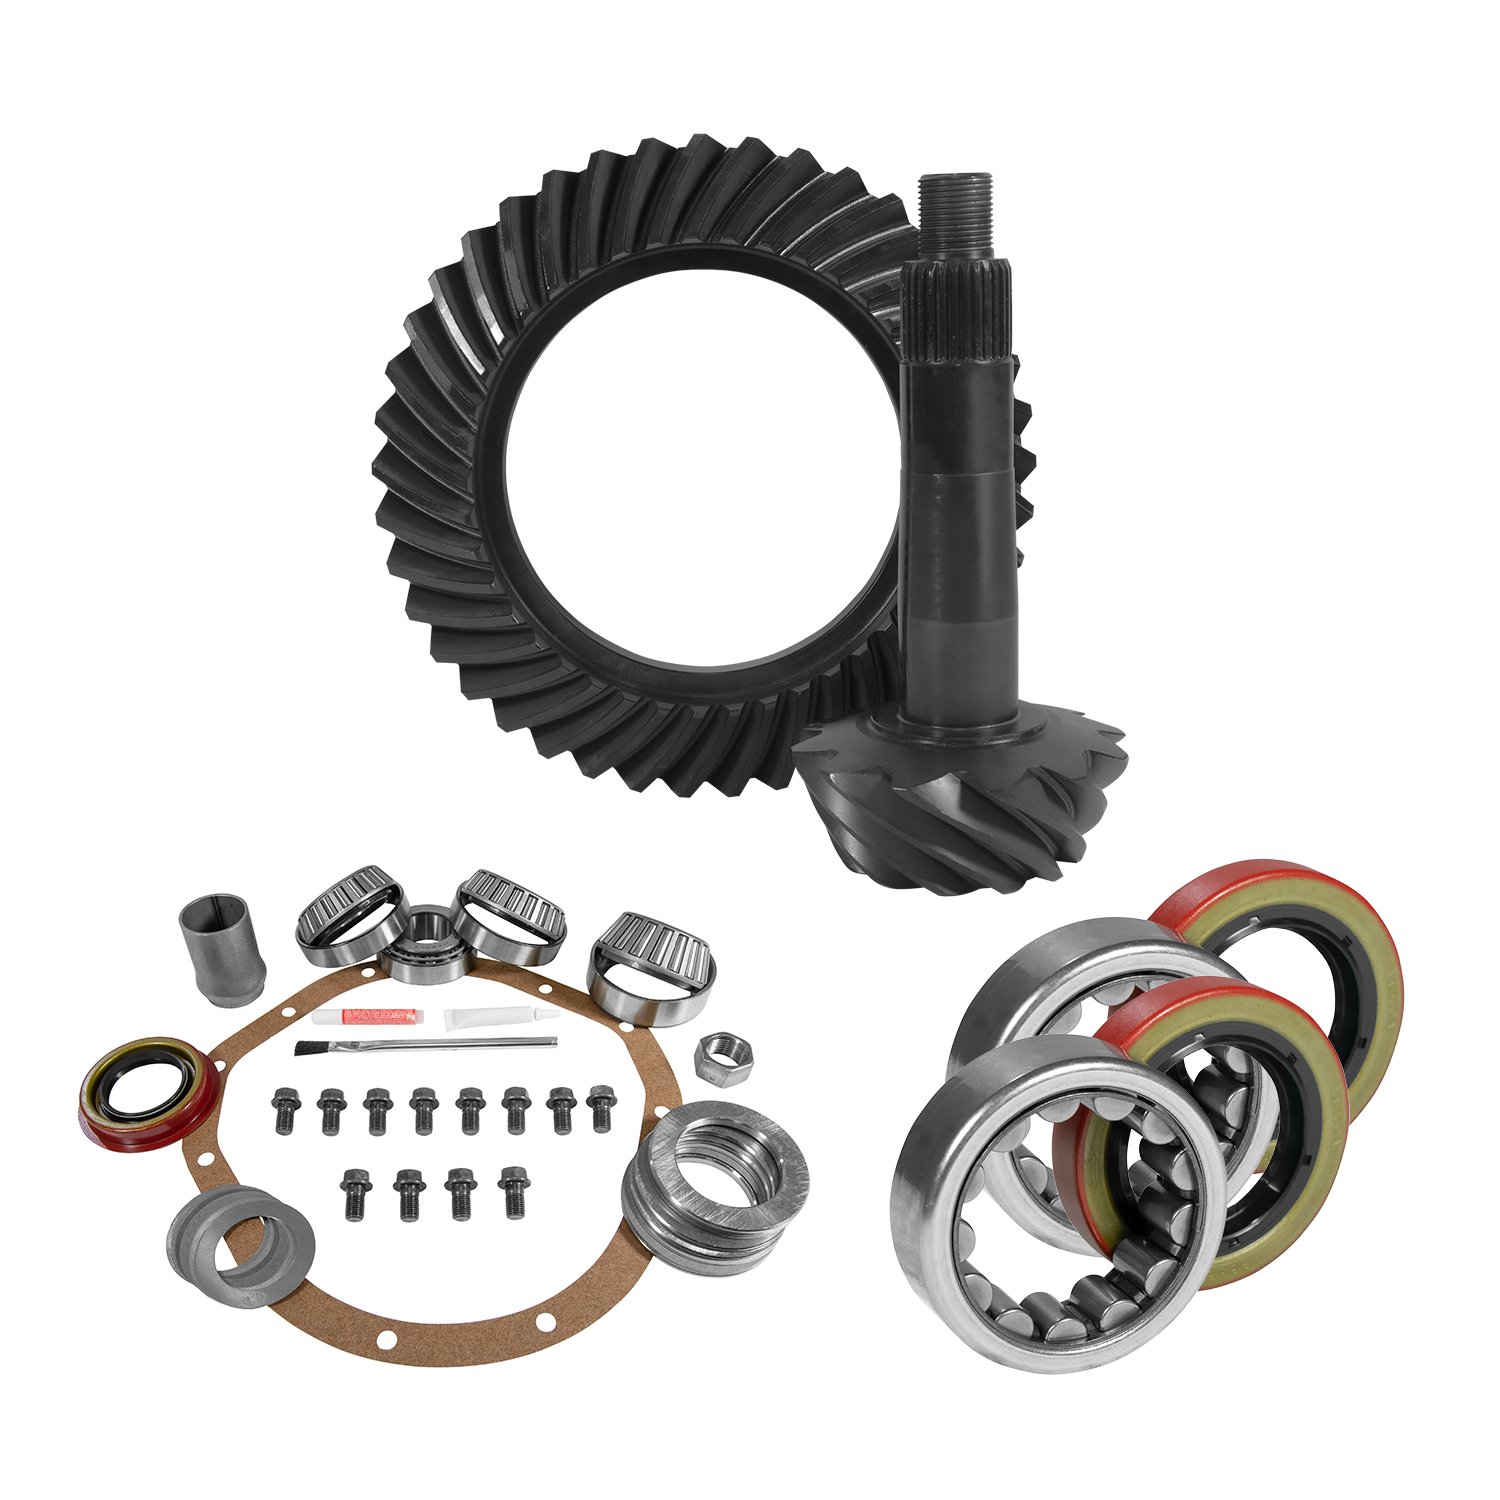 USA Standard 10684 8.875 in. GM 12T 4.11 Rear Ring & Pinion Install Kit, Axle Bearings & Seals